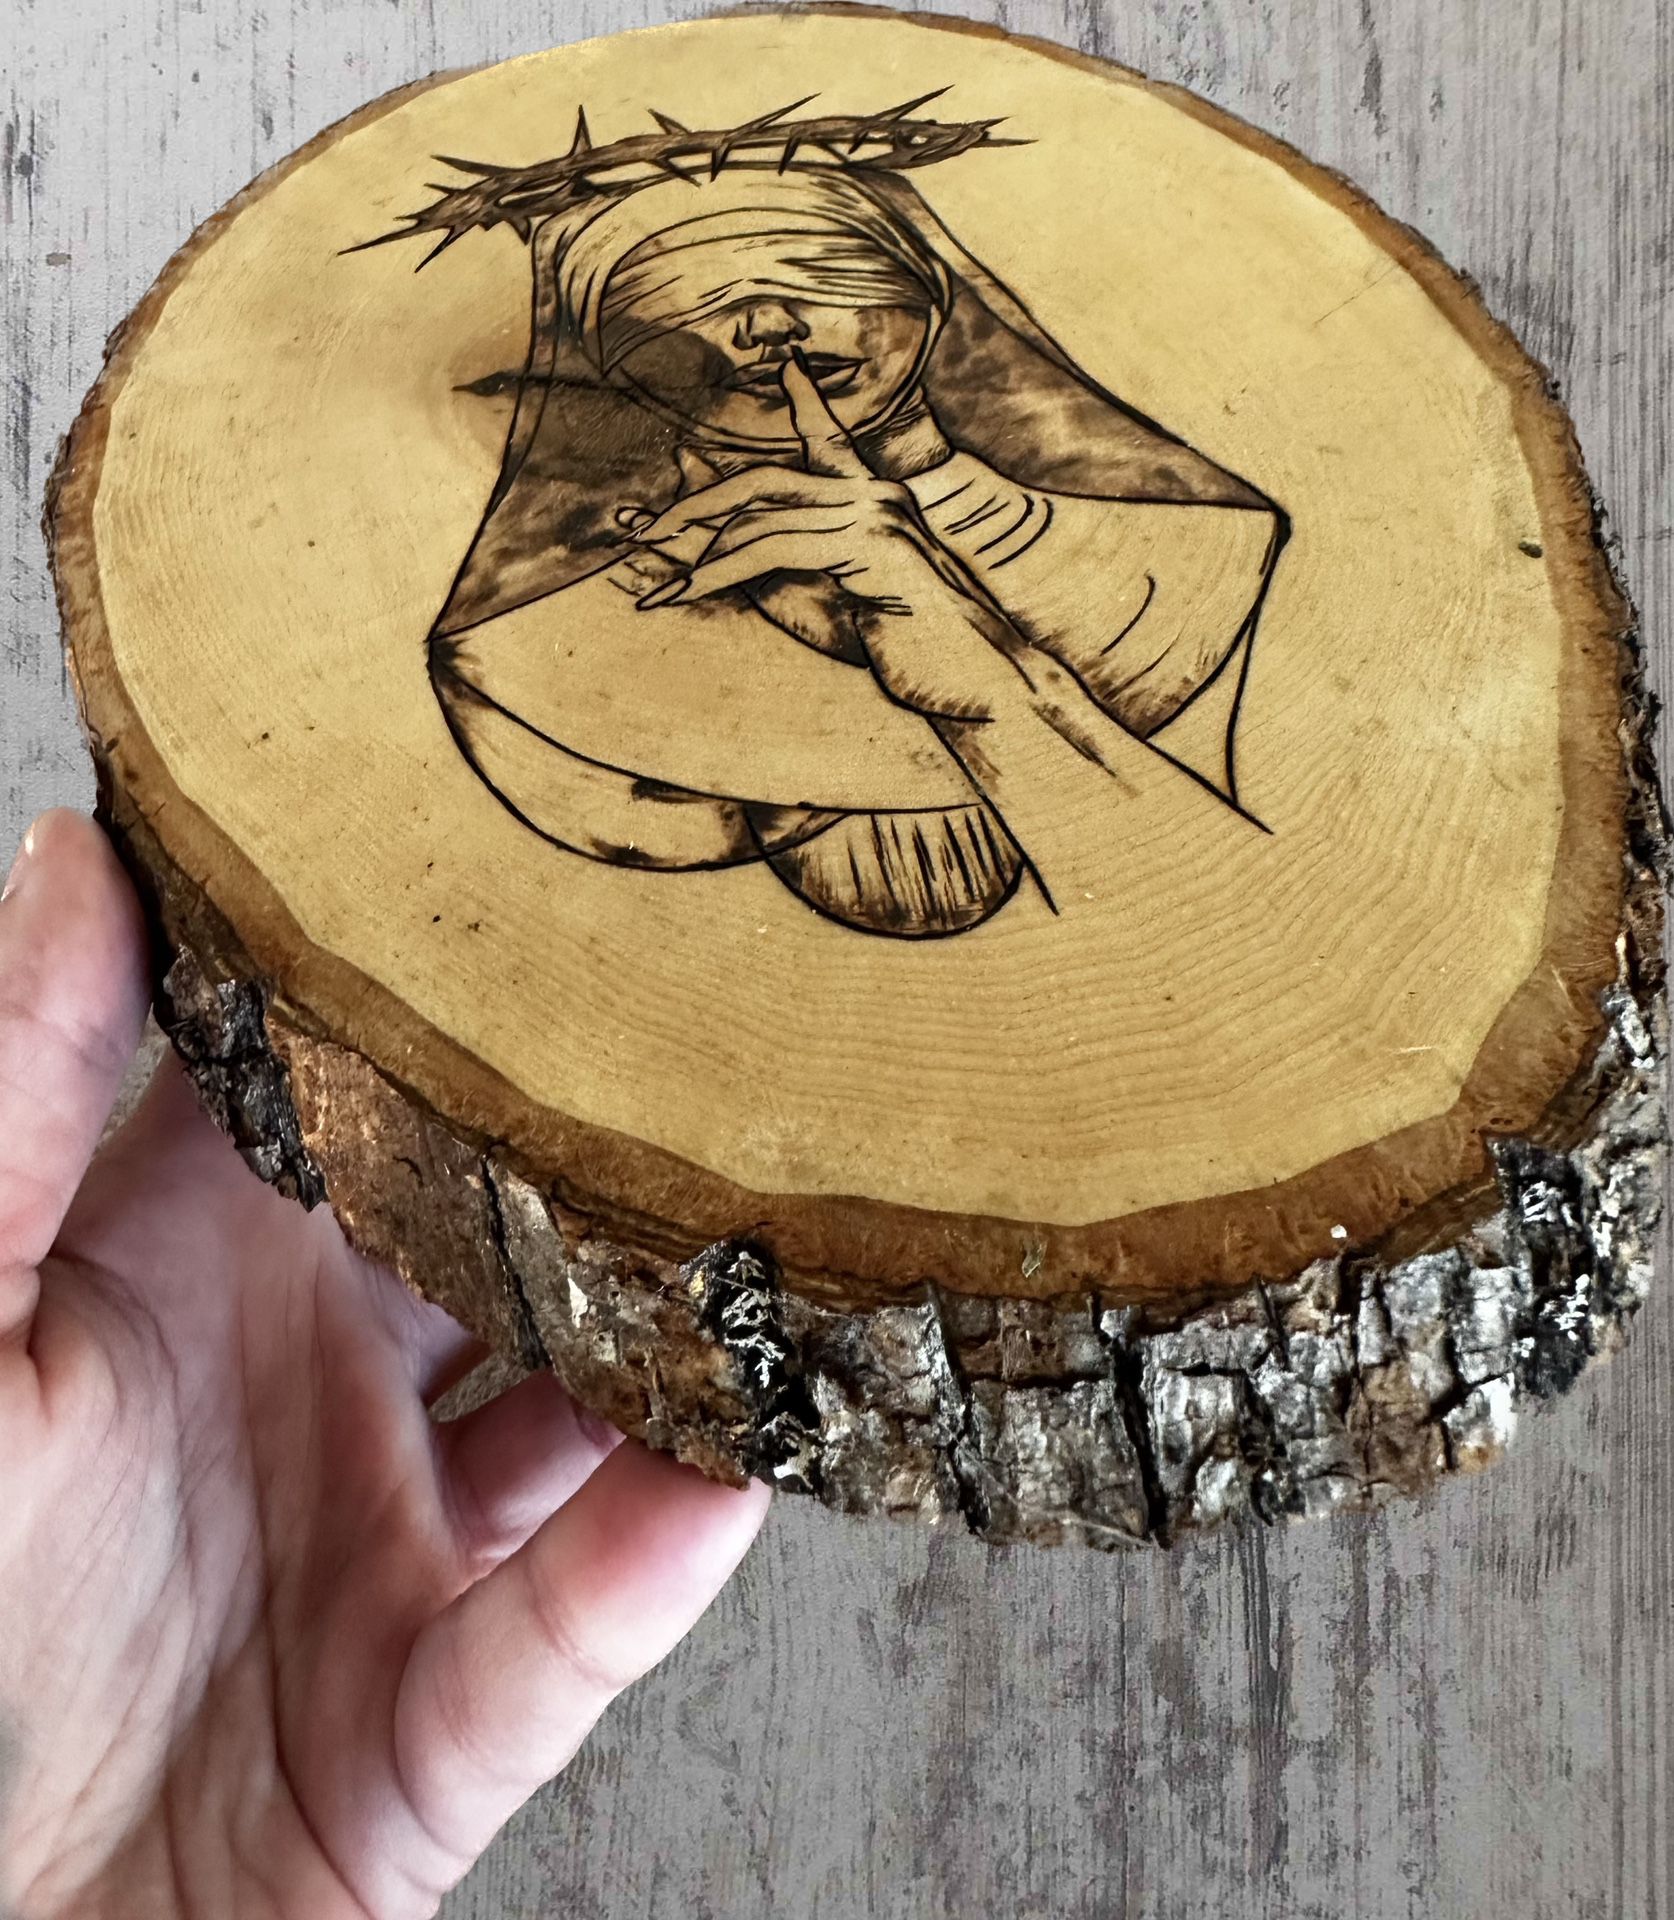 Nun Scary wood burning pyrography gift cutting cheese board coaster centerpiece wedding gift birthday basswood handcrafted wall handmade